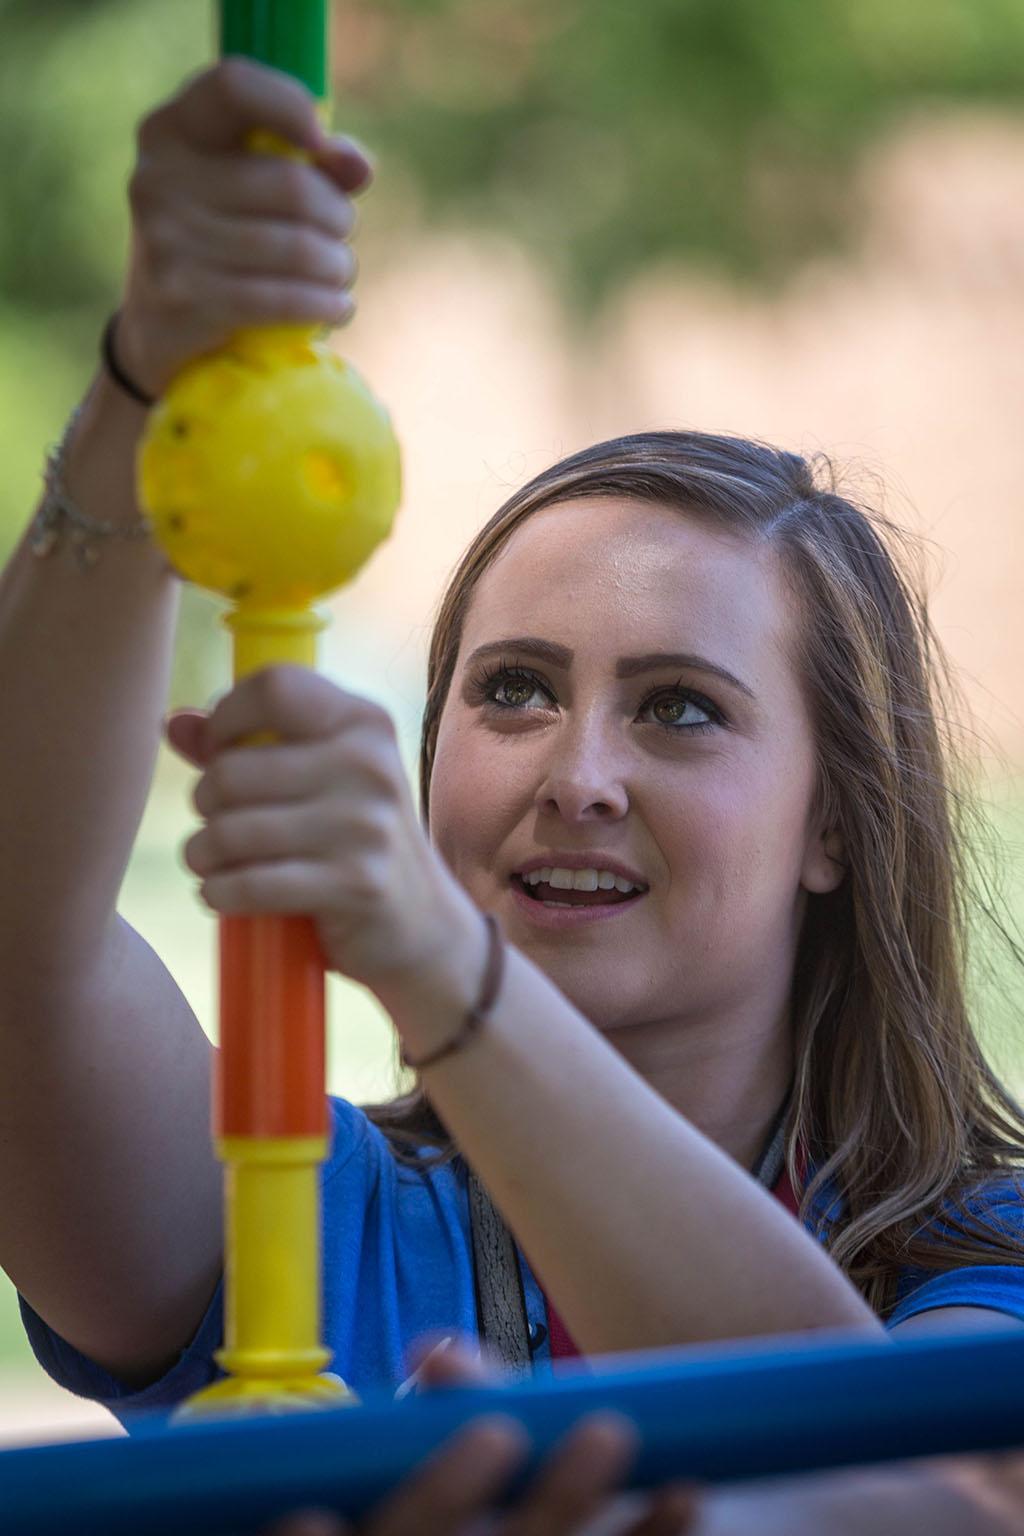 Katy Meadows, accounting freshman, builds a structure as part of Roundup Olympics on the Quad. Photo by Izziel Latour